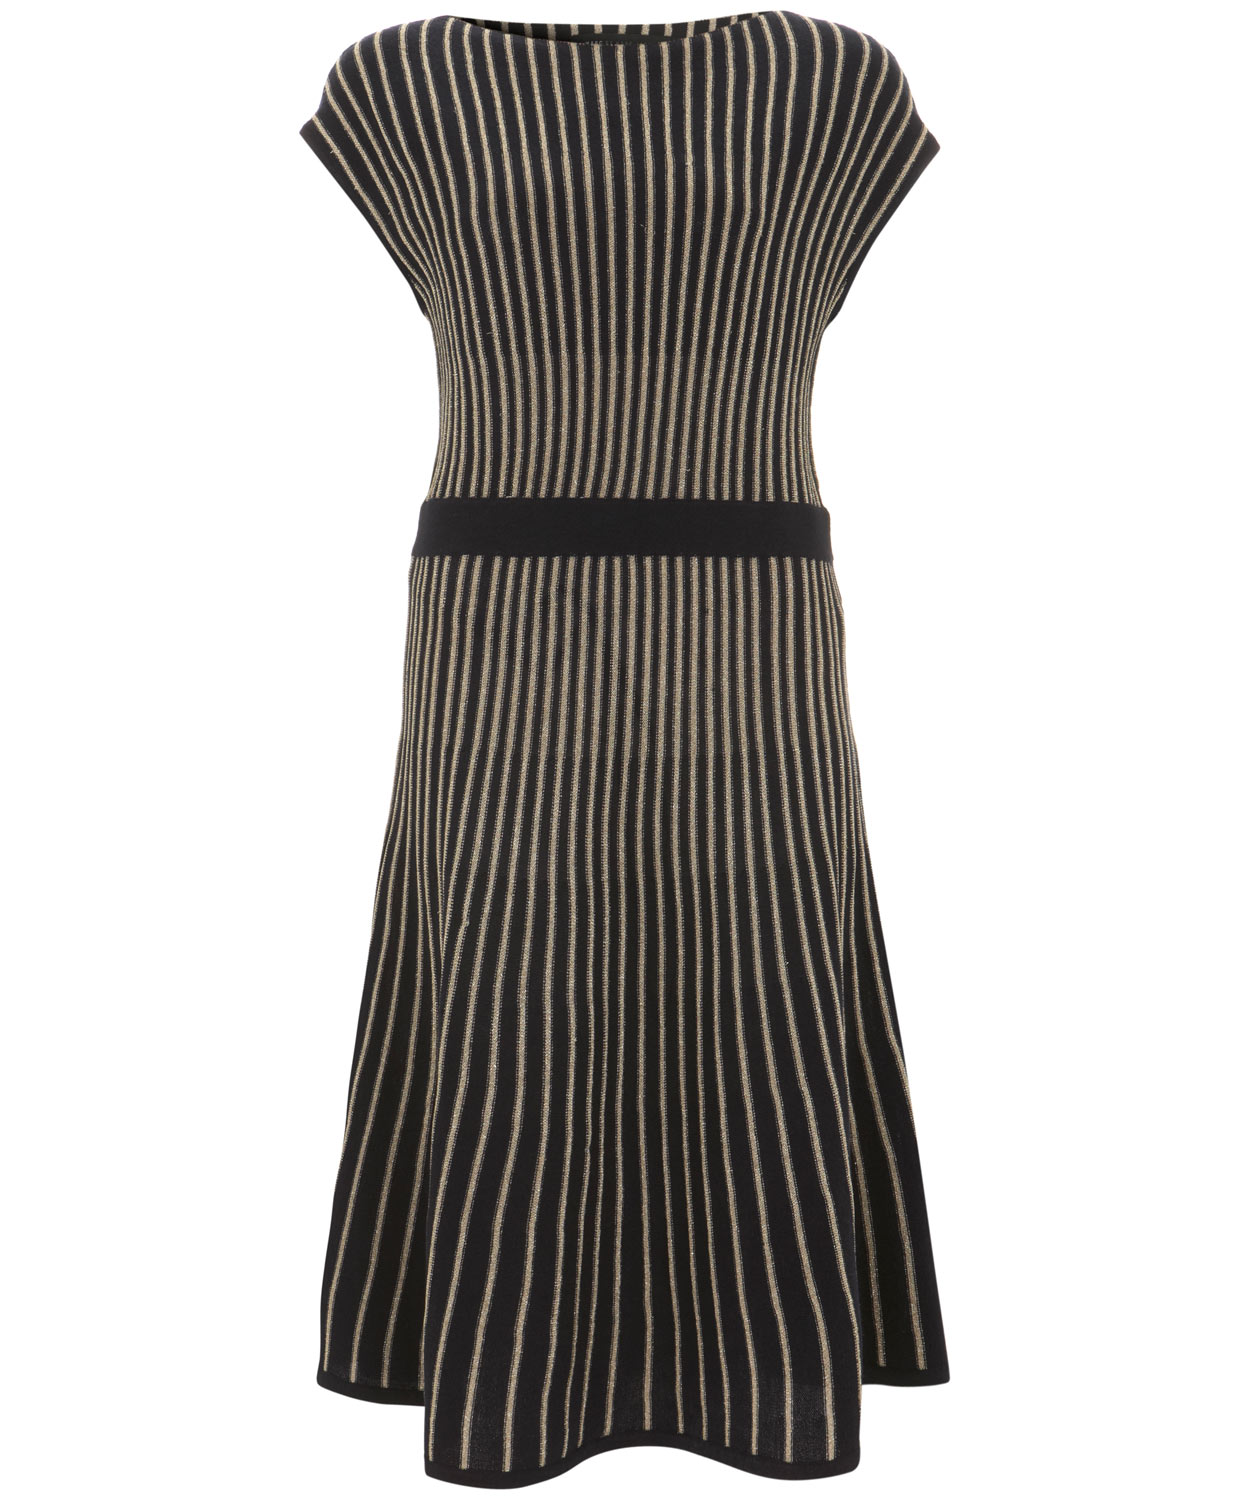 Lyst - Marc By Marc Jacobs Navy and Gold Lurex Striped Dress in Blue